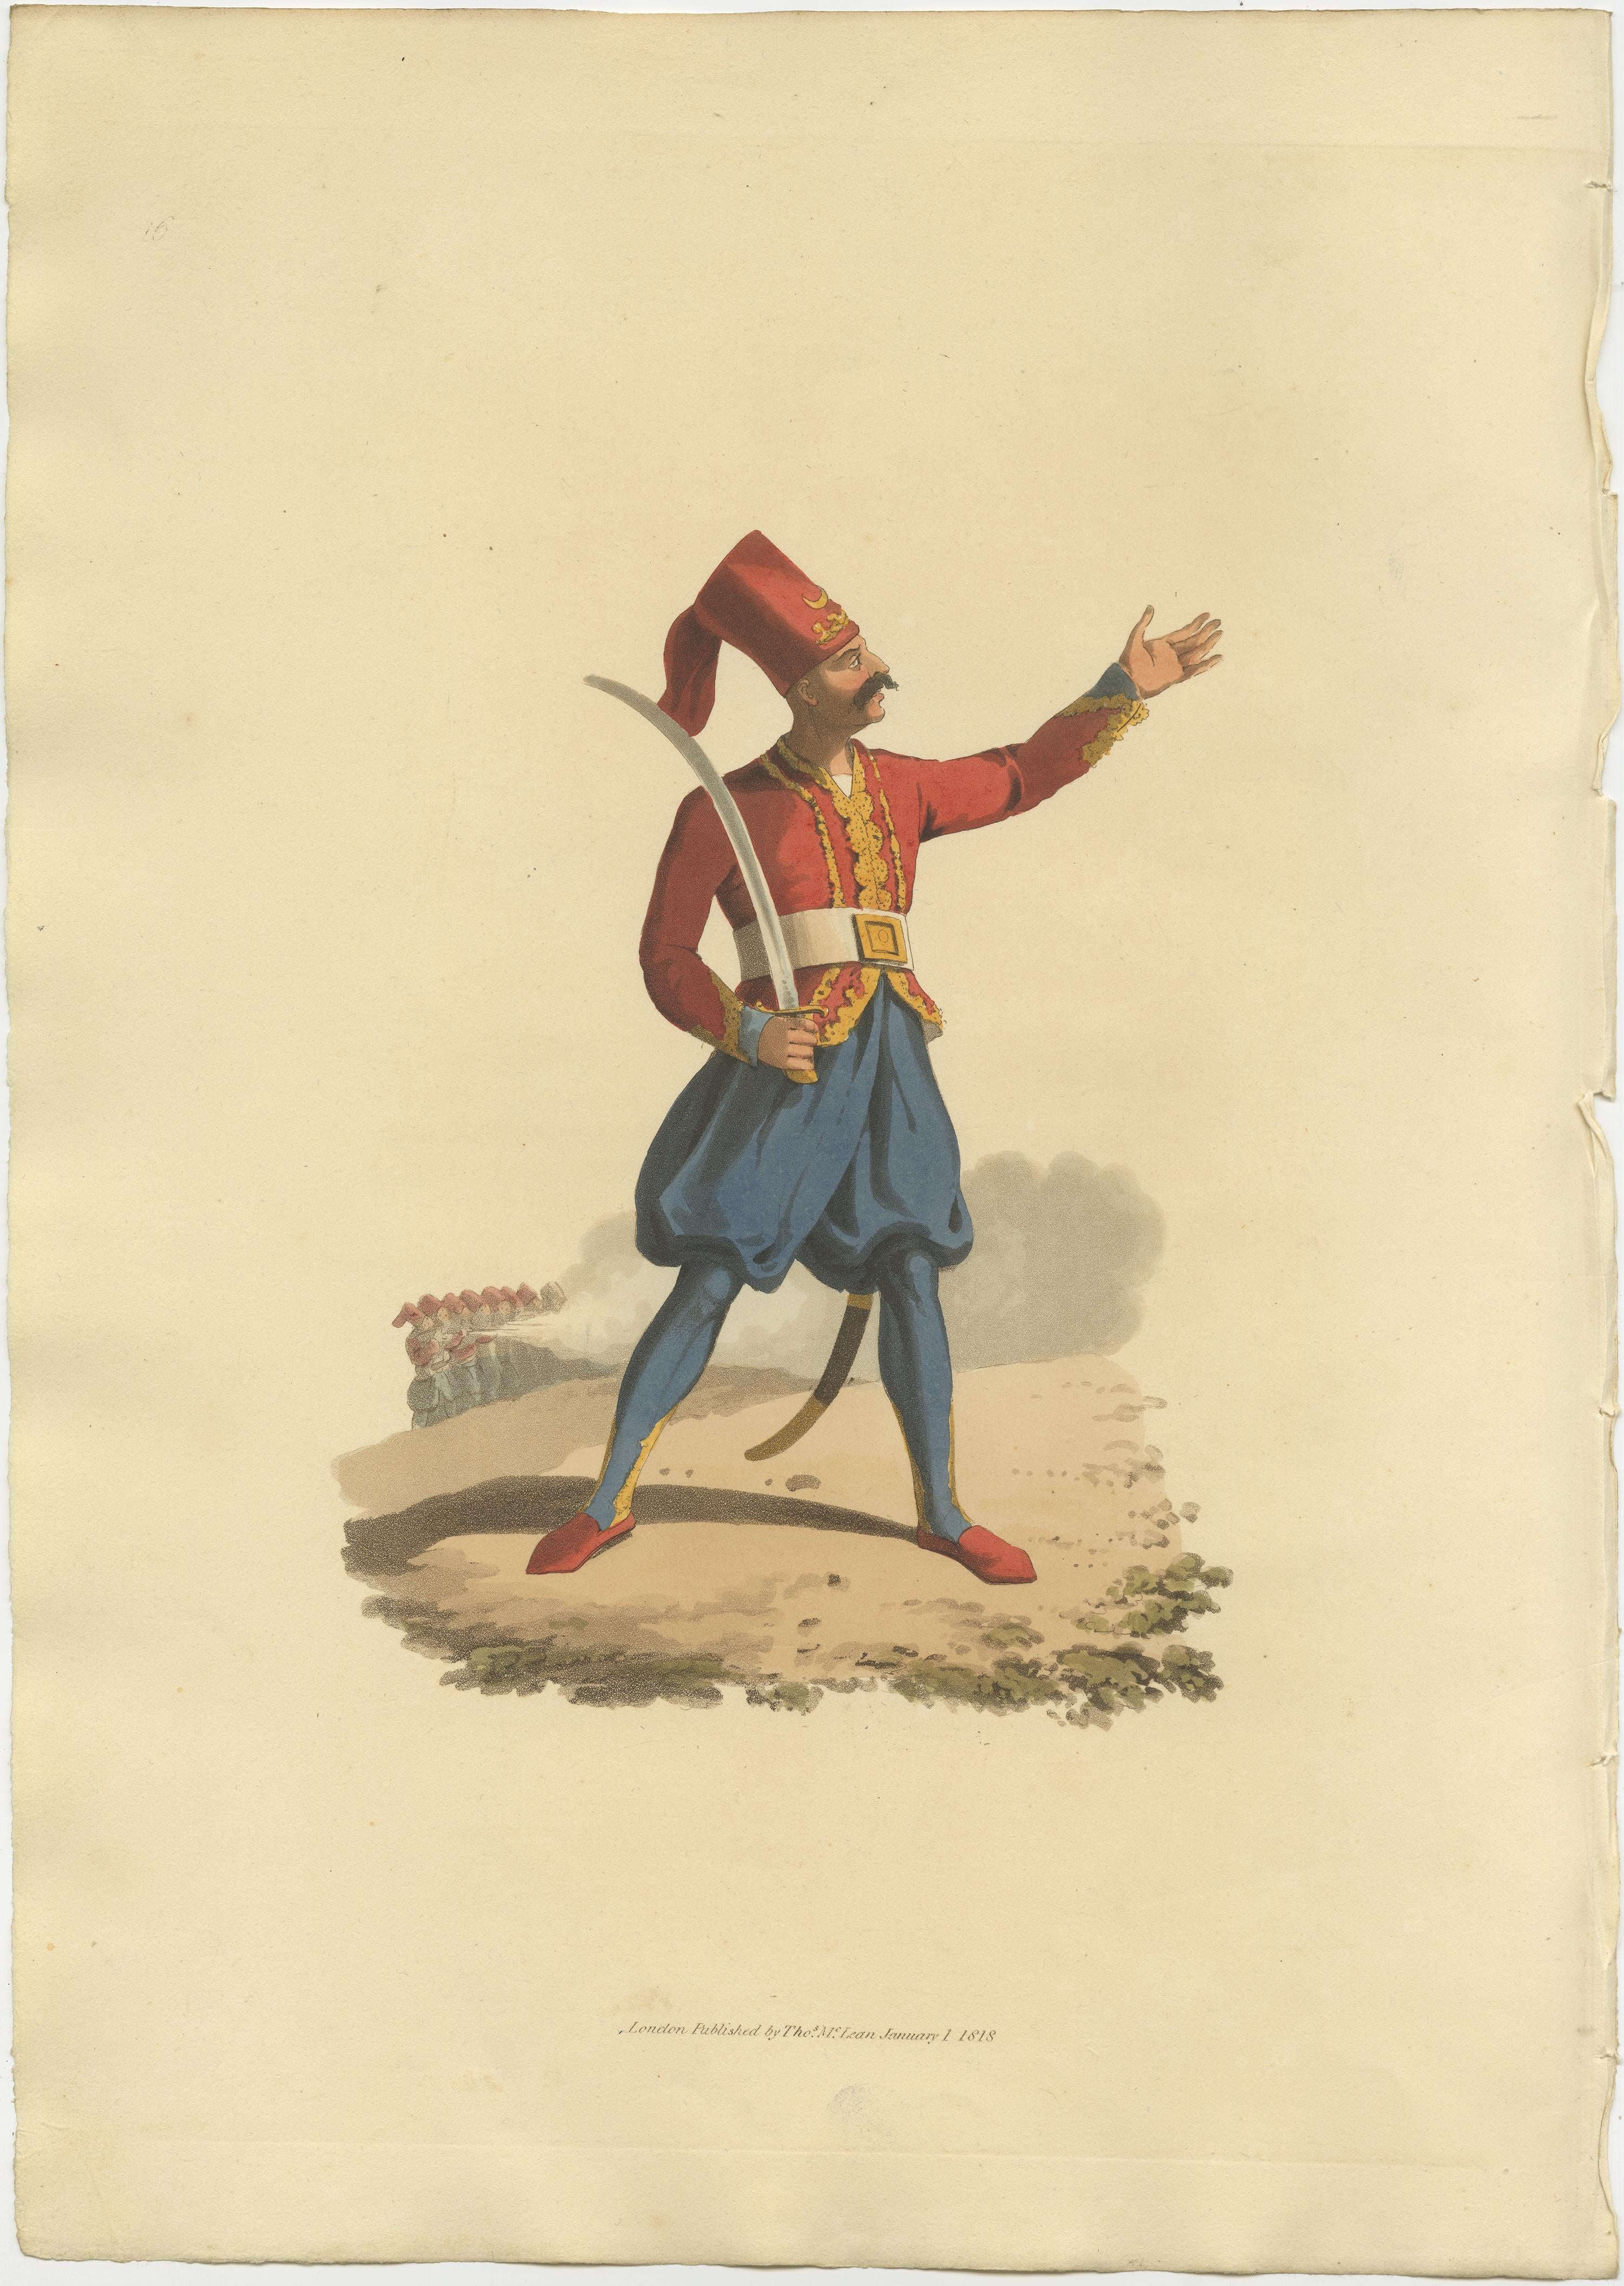 This print is from 'The Military Costume of Turkey. Illustrated by A Series of Engravings. From Drawings made on the Spot. Dedicated by Permission to His Excellency the Minister of the Ottoman Porte to his Britannic Majesty.'

London, Published by